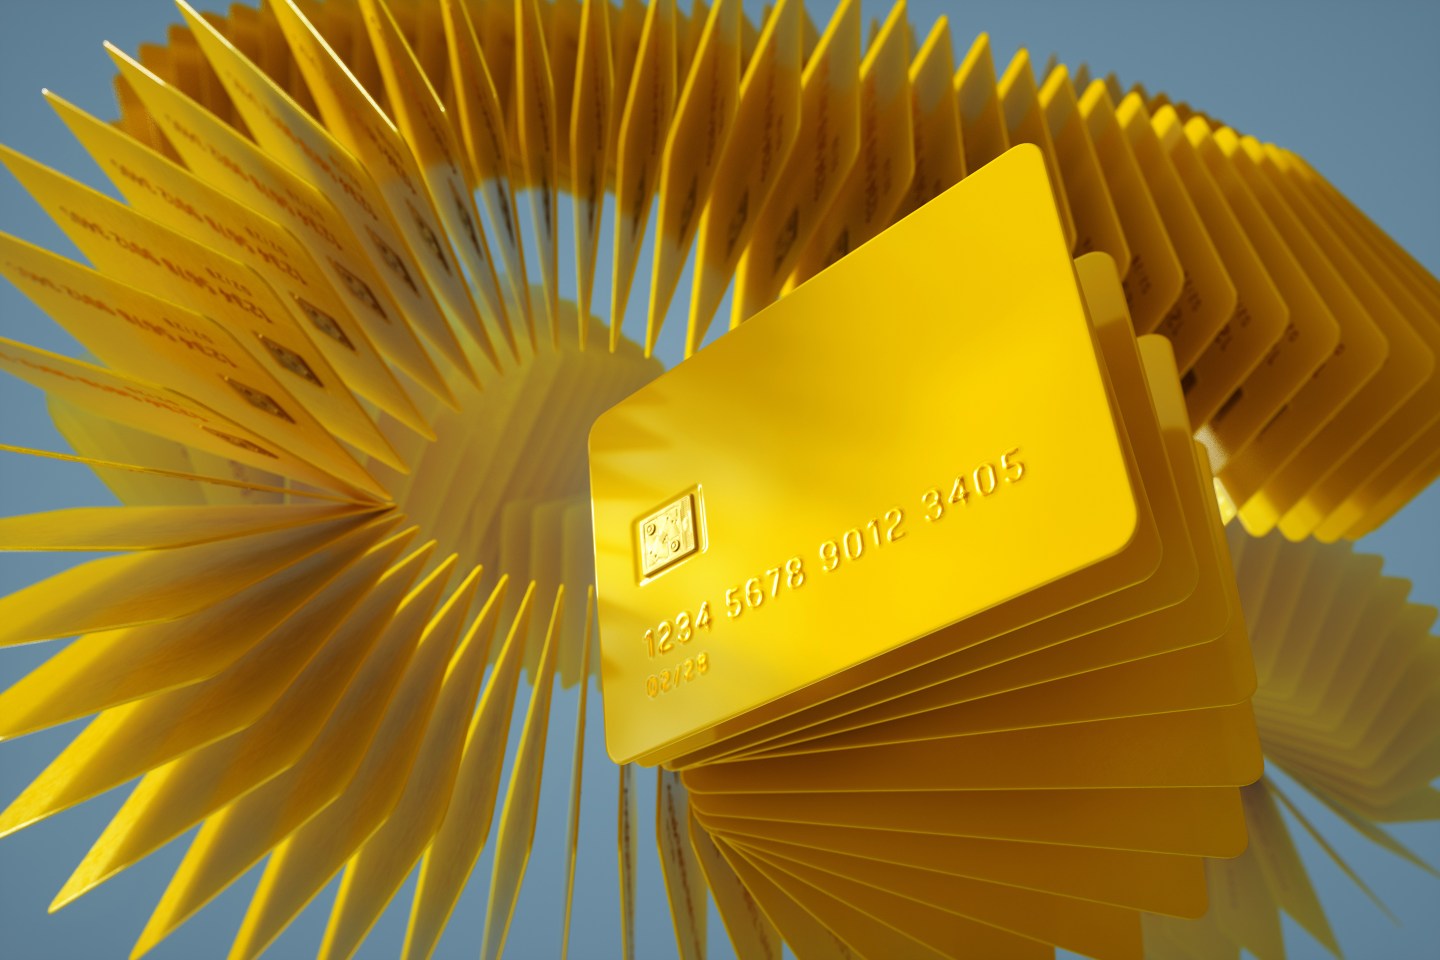 Digital generated image of multiple numbers of yellow credit cards stacking across the frame.